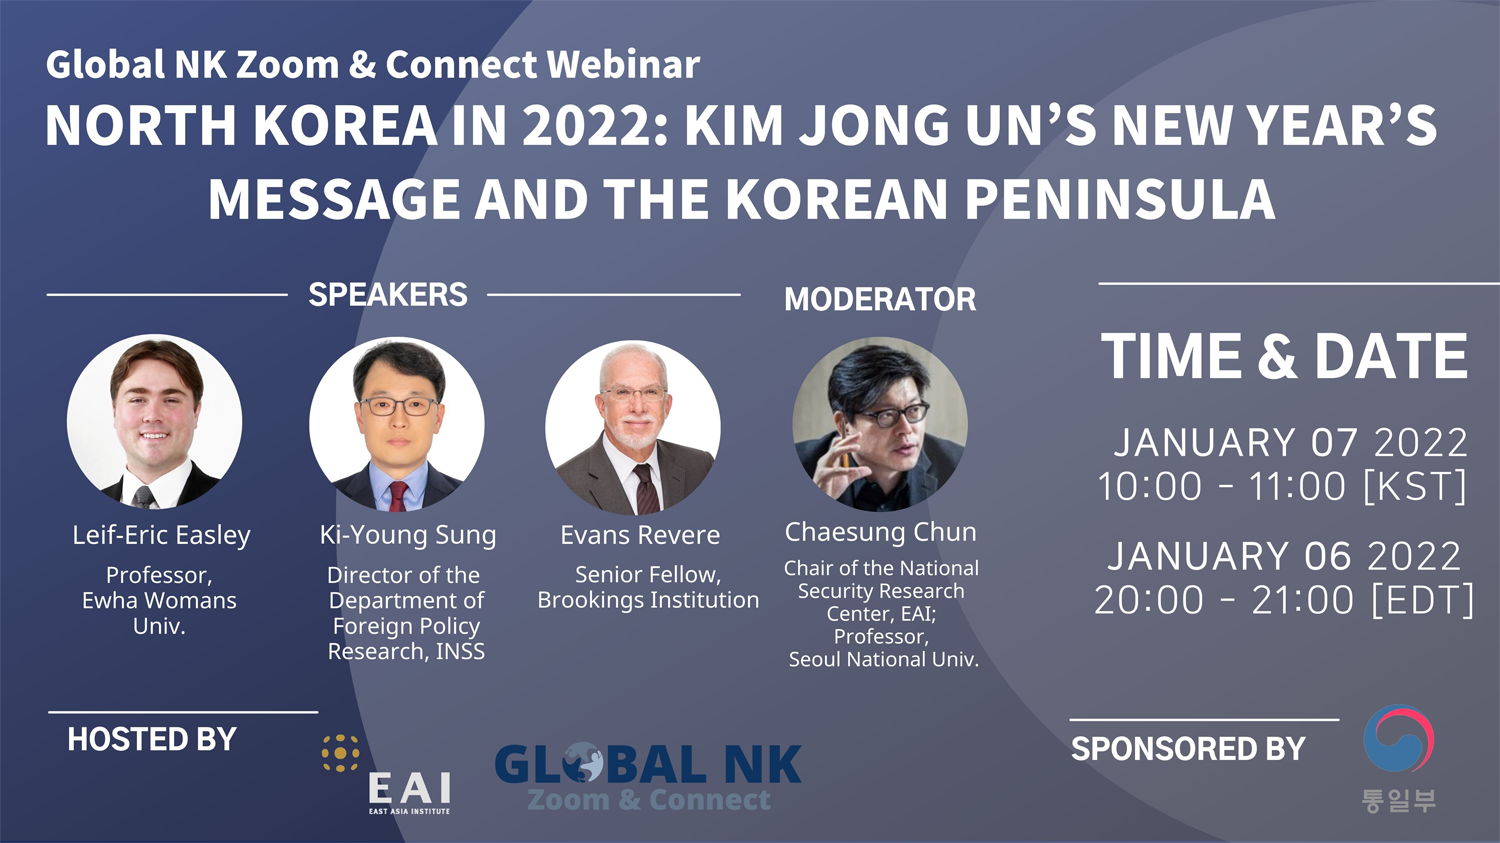 [Global NK Zoom & Connect Online Seminar] “North Korea in 2022: Kim Jong Un’s New Year’s Message and the Korean Peninsula”